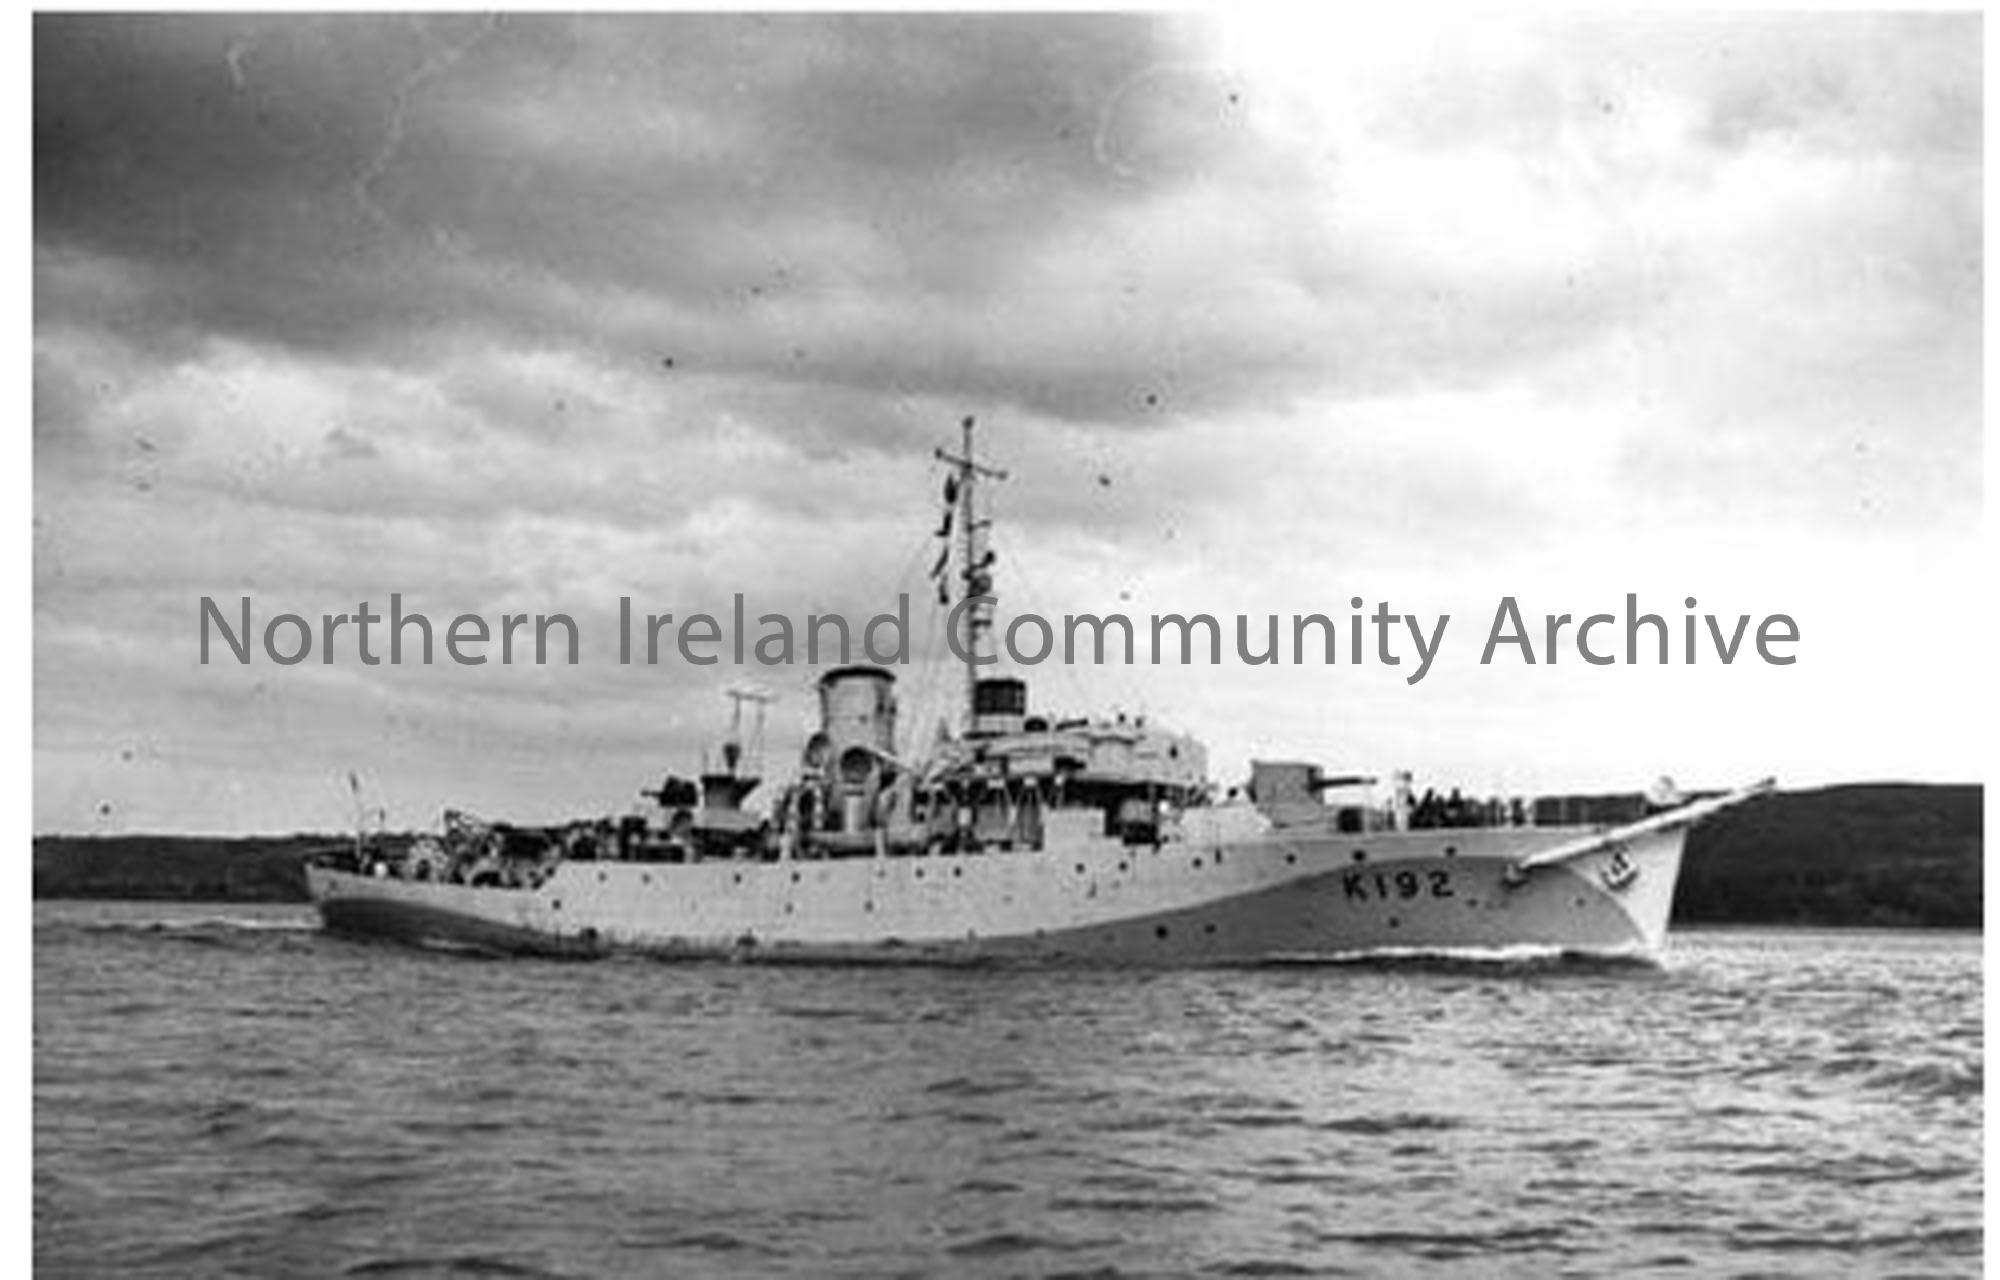 HMS Bryony
K192
Ship number 1102
Launched 15th March 1941
Commissioned 16th June 1942
 (3236)